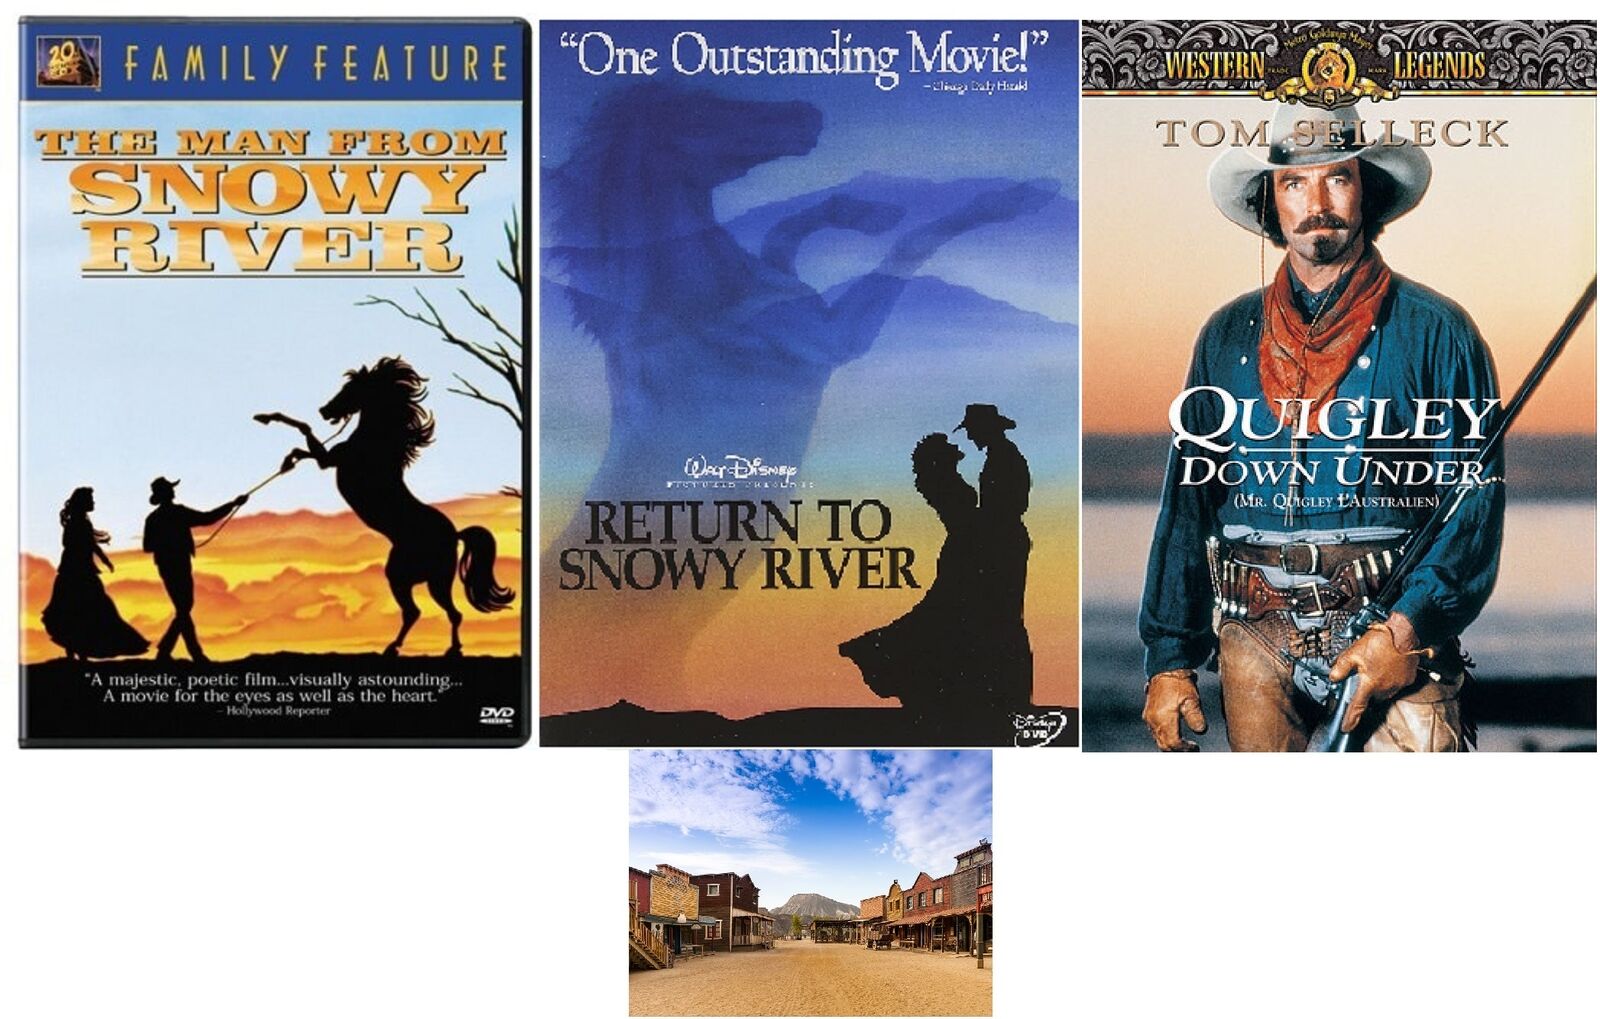 THE MAN FROM SNOWY RIVER/RETURN TO SNOWY RIVER & QUIGLEY DOWN UNDER 3 DVD SET